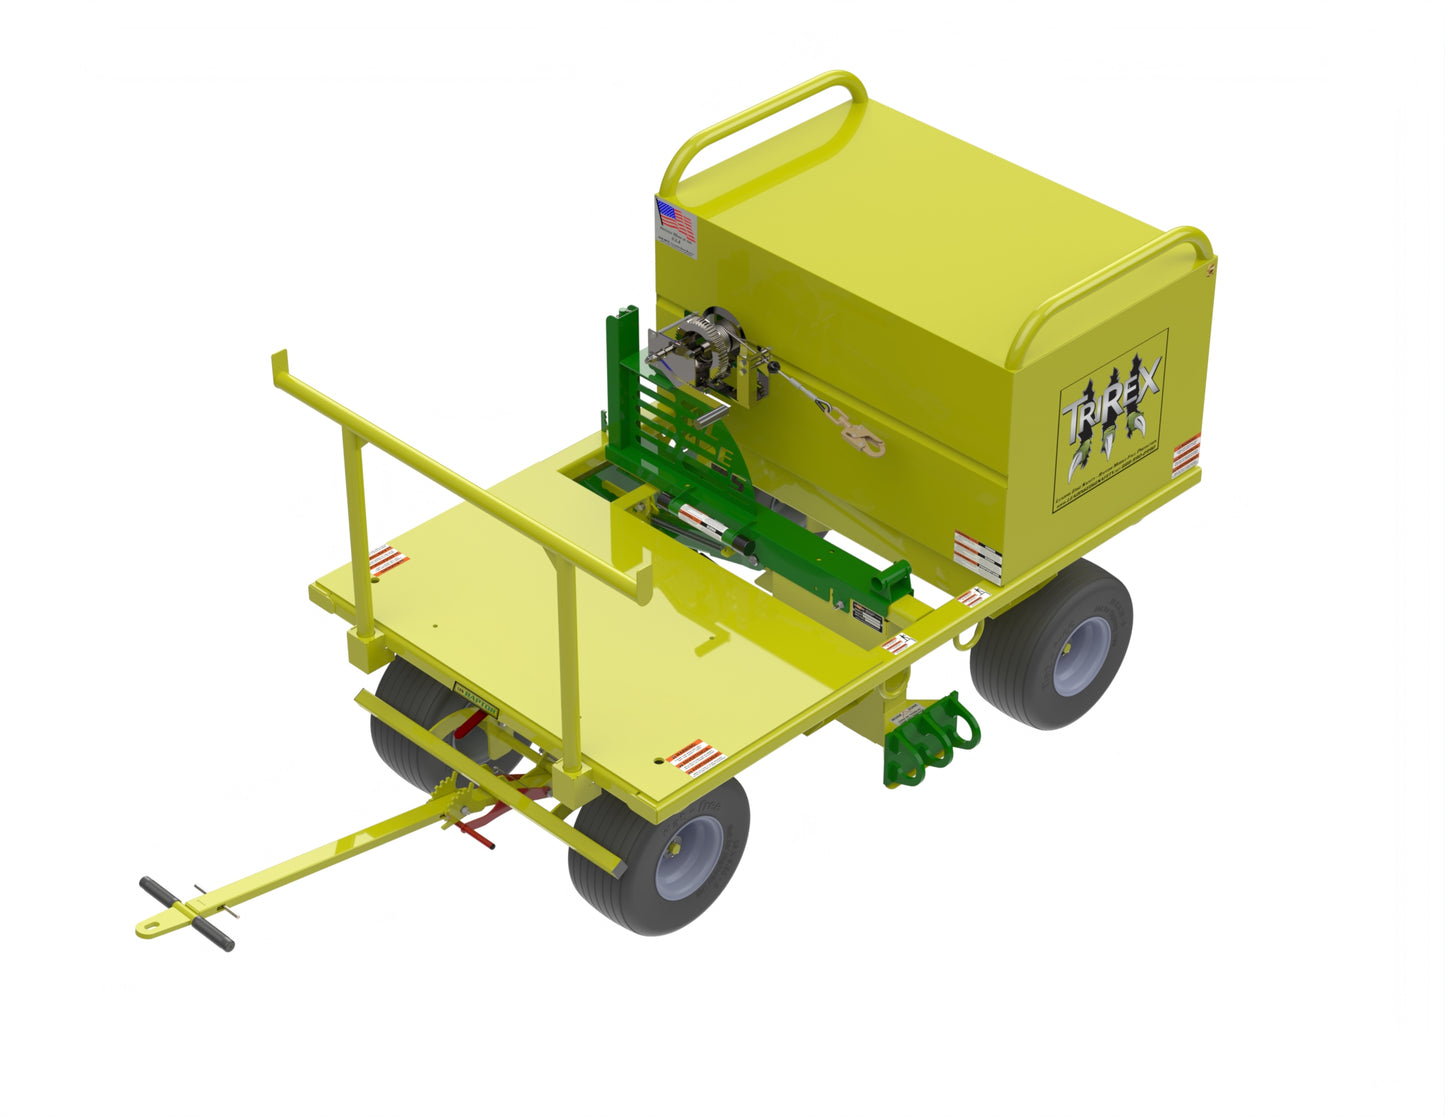 TriRex Mobile Fall Protection Carts